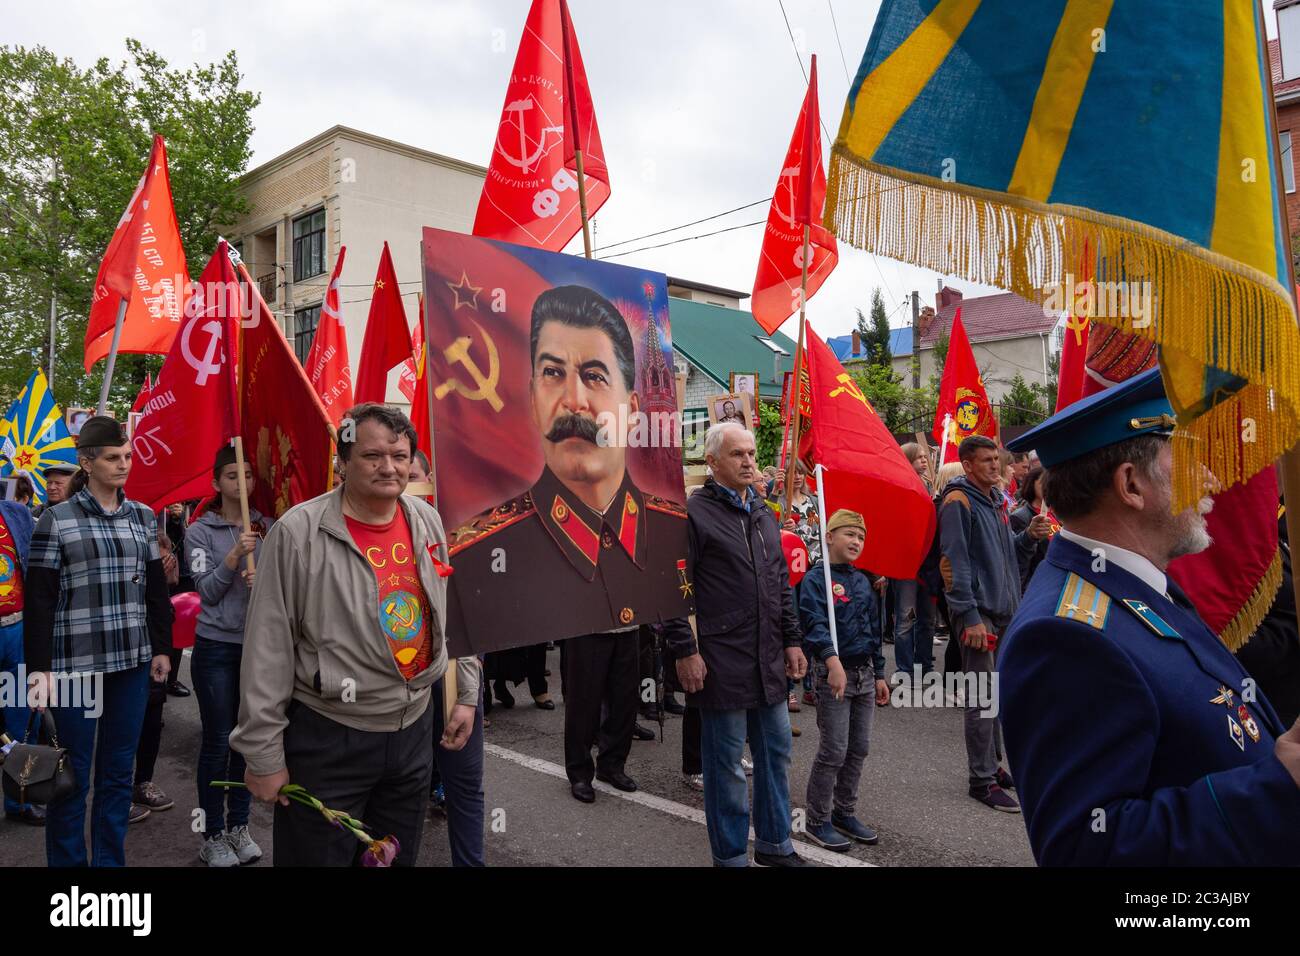 Anapa, Russia - May 9, 2019: People carry a portrait of Joseph Stalin along the streets of Anapa, at a festive procession dedica Stock Photo